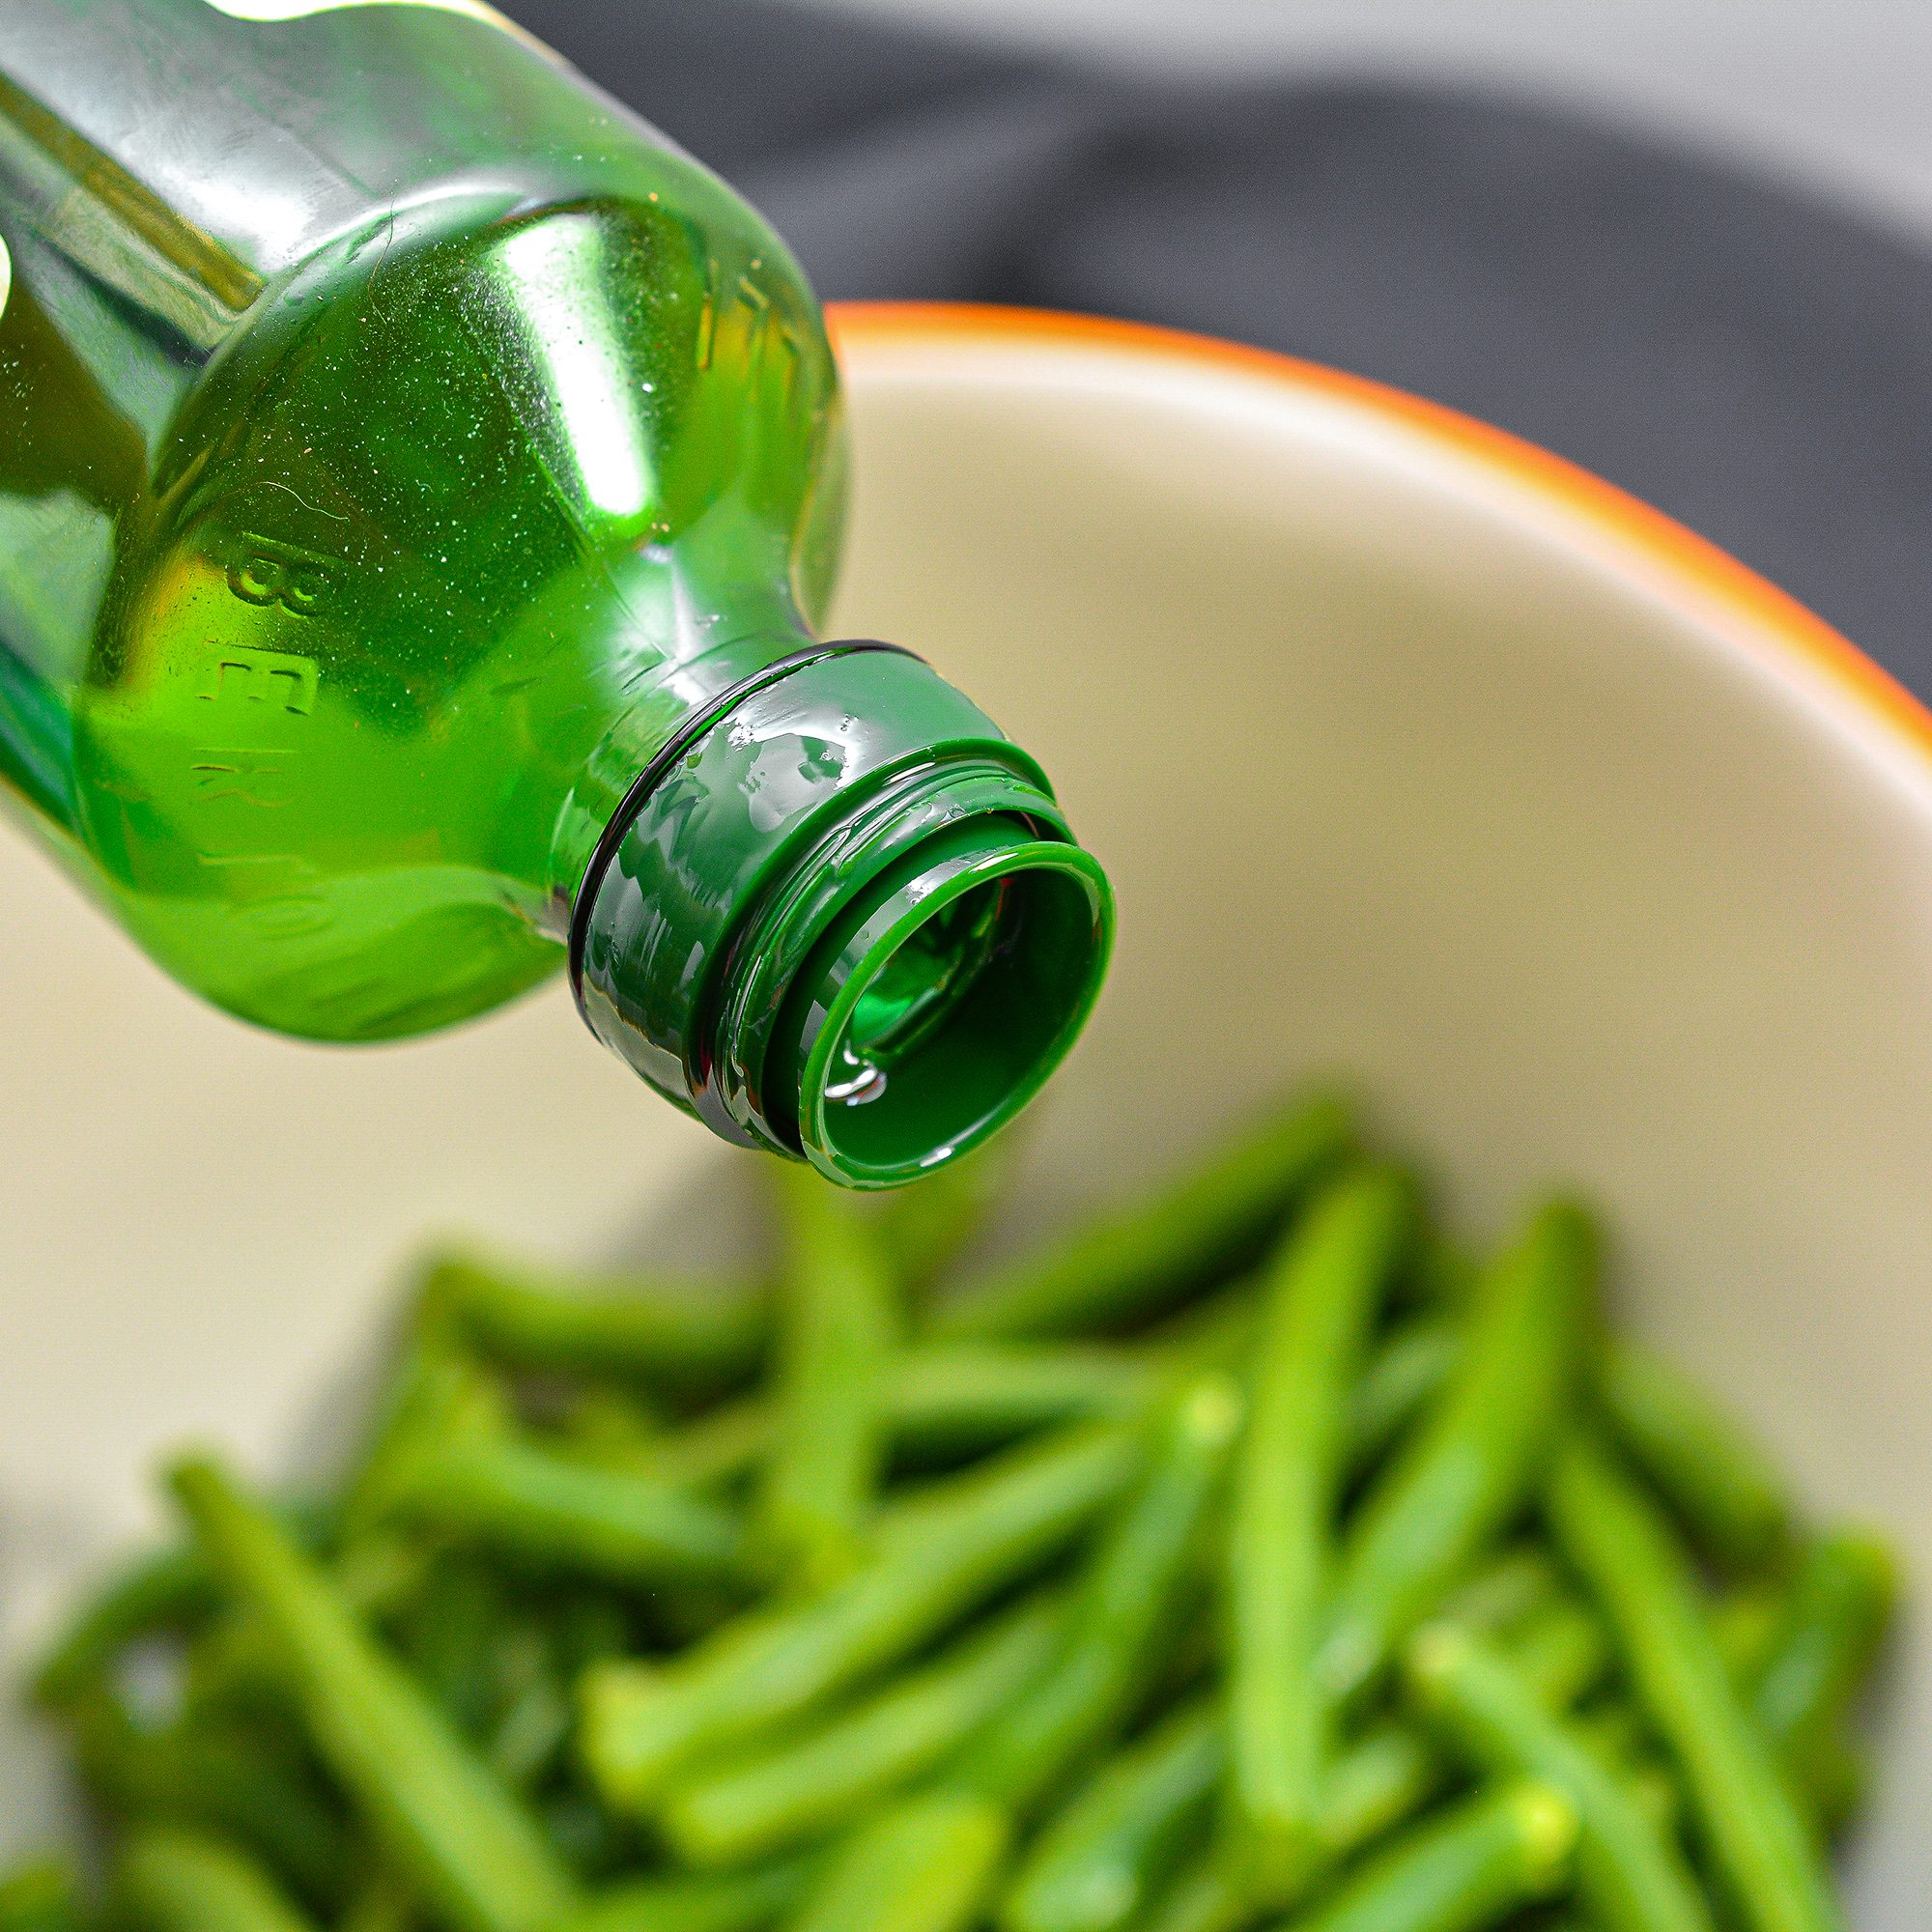 In a mixing bowl, toss the trimmed green beans in the remaining olive oil, garlic powder, and salt and pepper to taste.